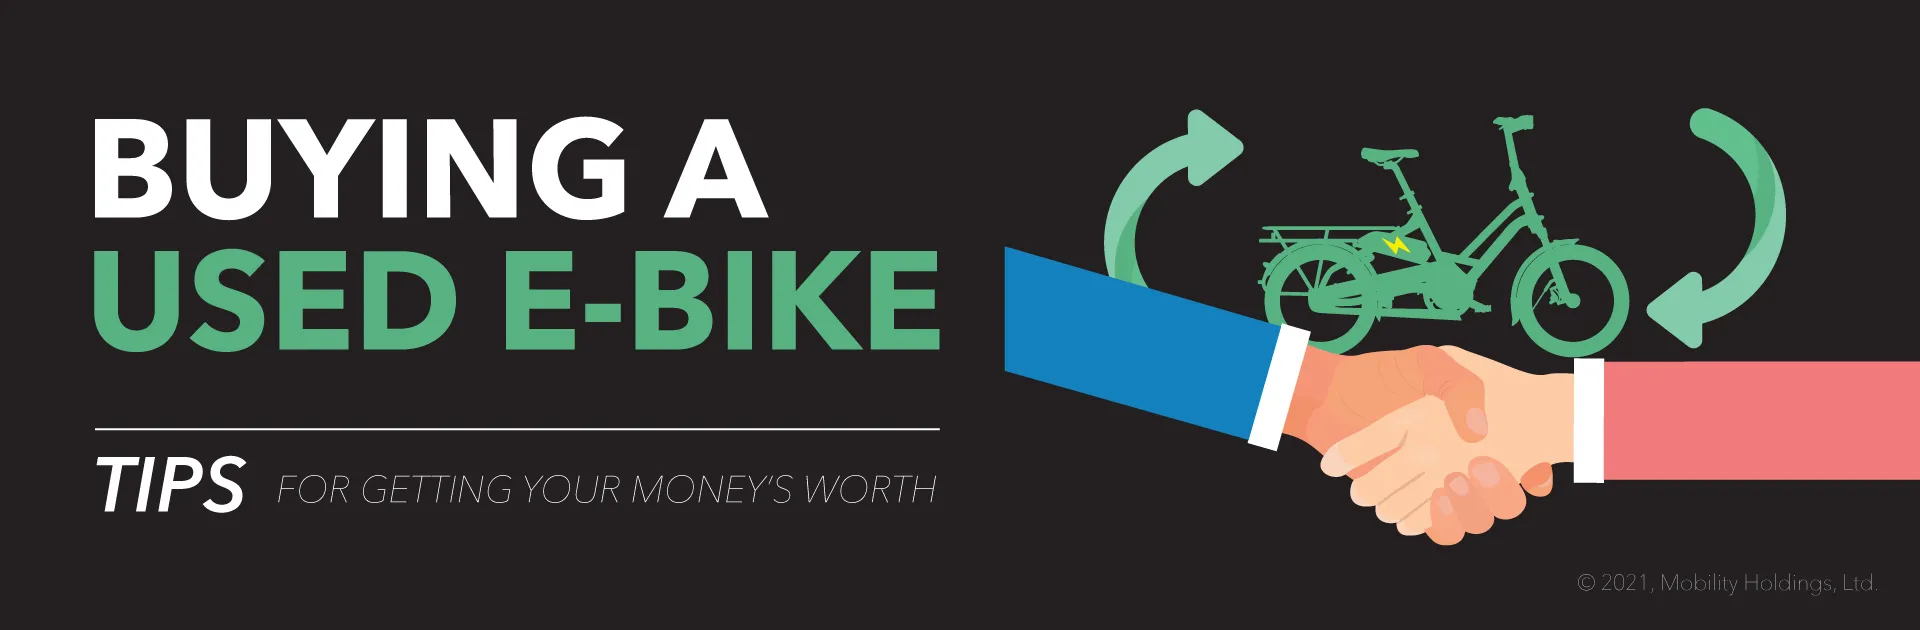 Guide to Buying a Used E-Bike